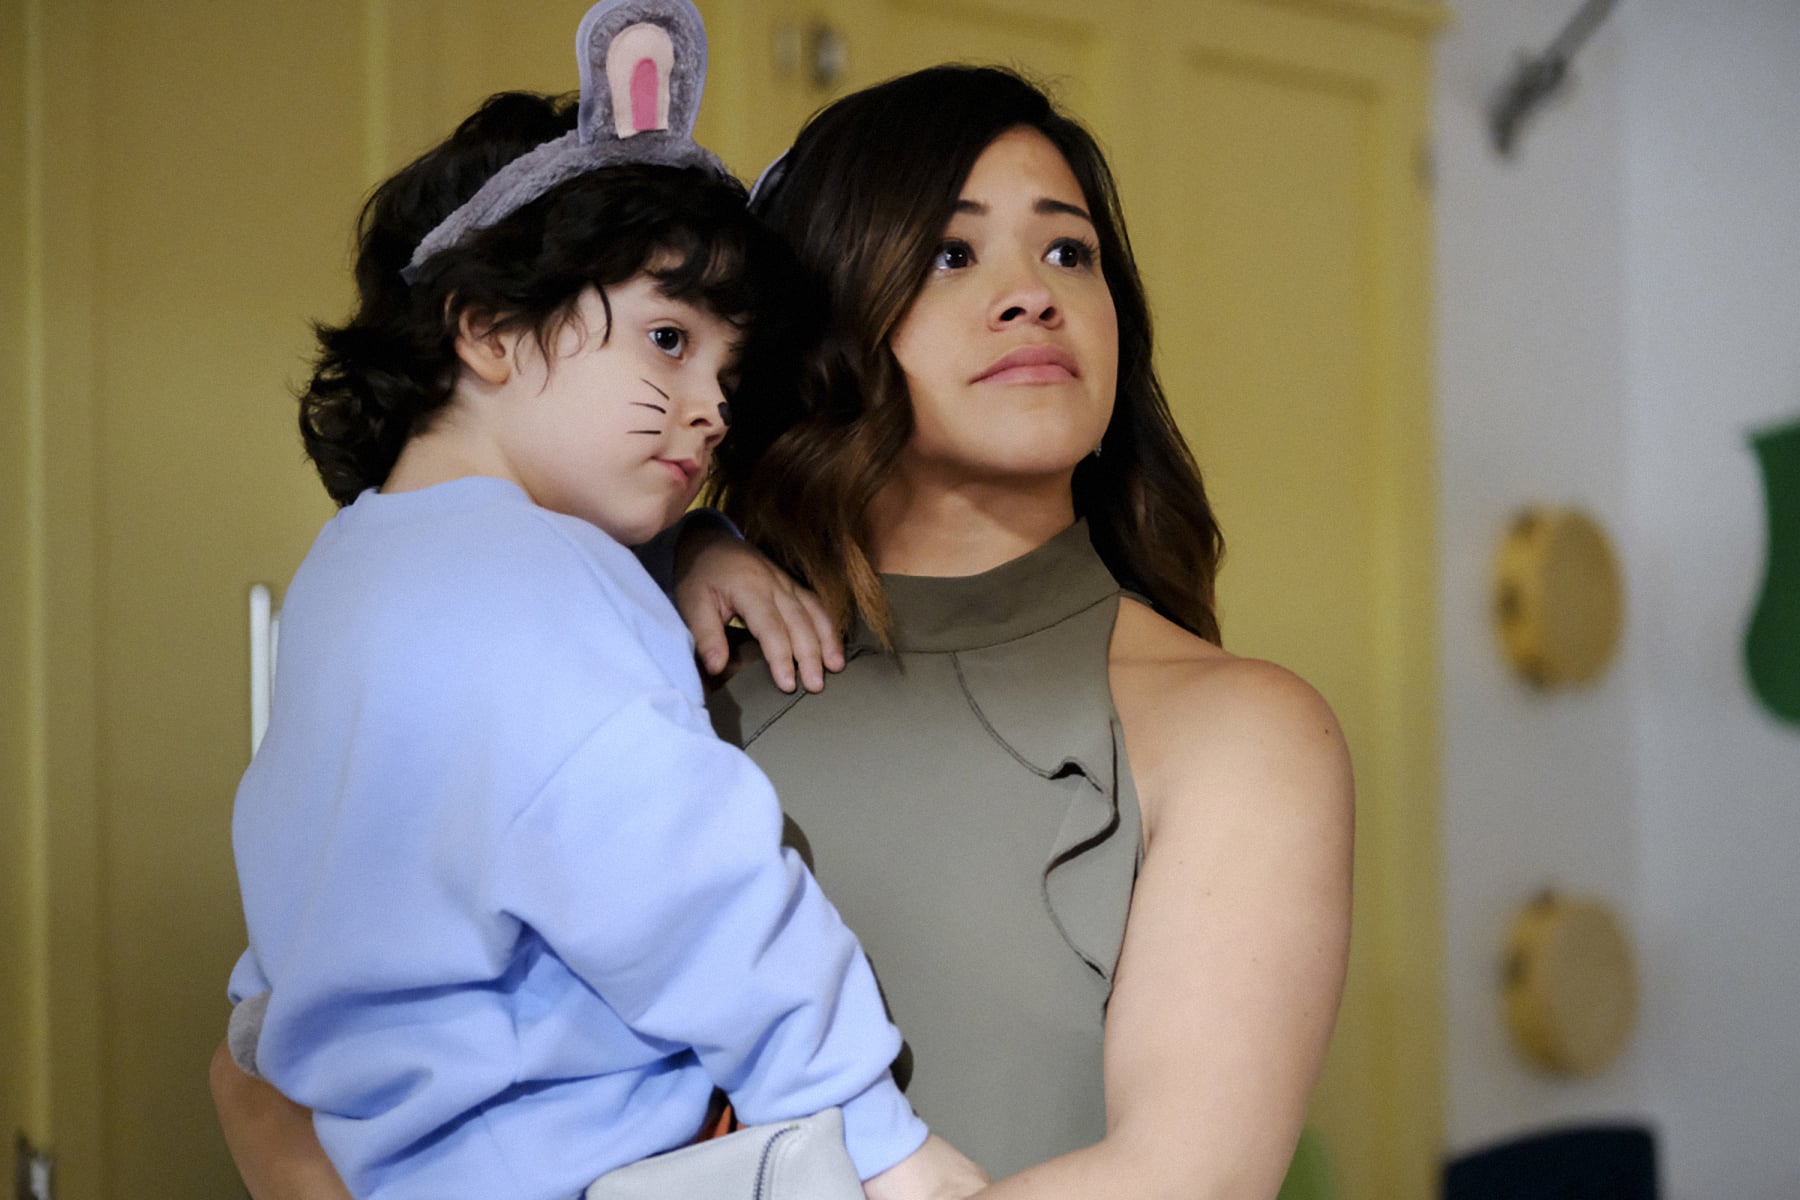 JANE THE VIRGIN, Joseph Sanders, Gina Rodriguez in 'Chapter Sixty-Three', (Season 3, Episode 319, aired May 15, 2017), ph: Scott Everett White / The CW Network / courtesy Everett Collection